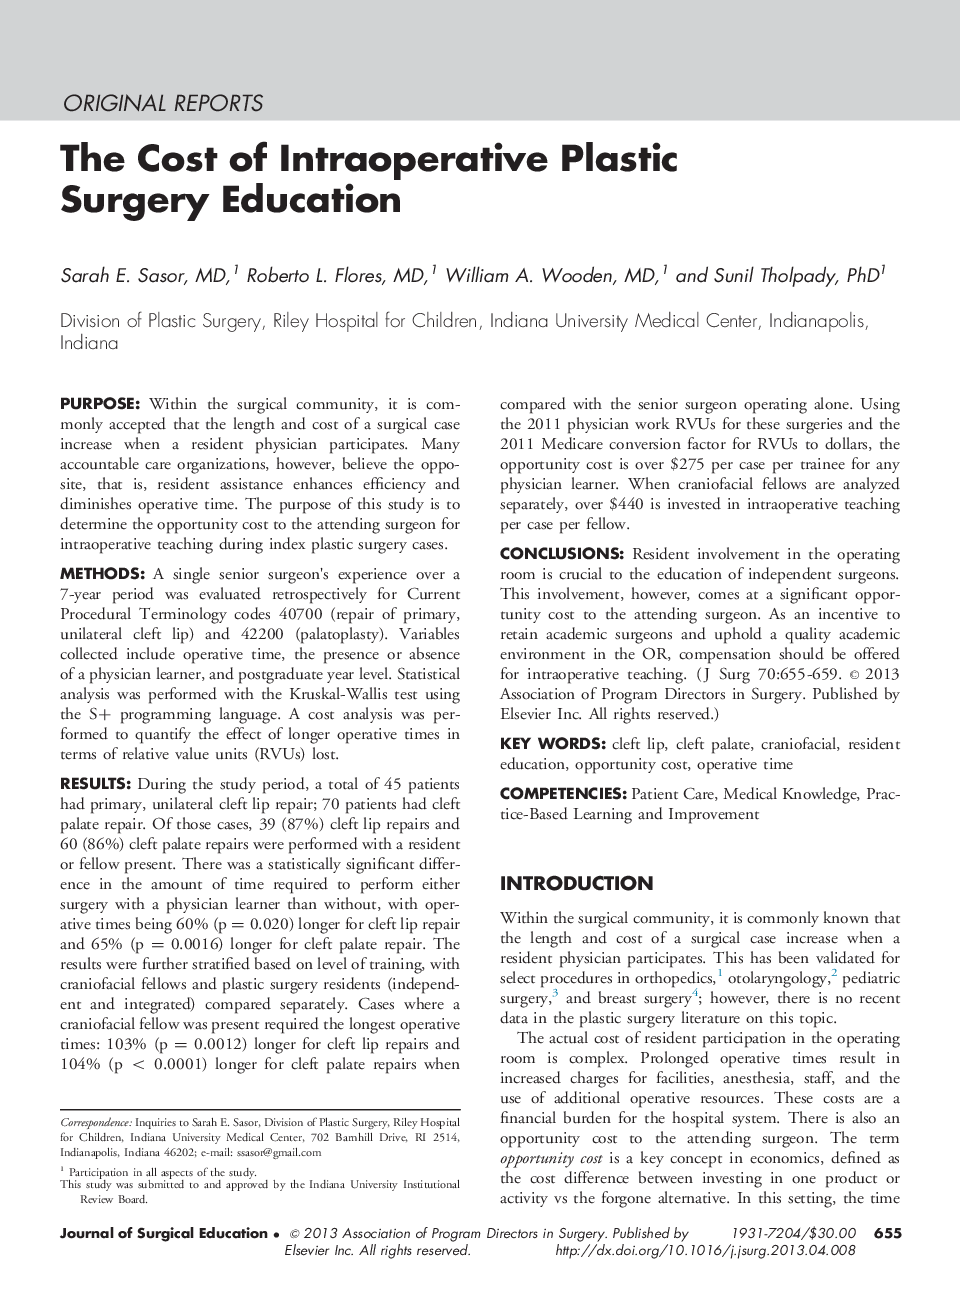 The Cost of Intraoperative Plastic Surgery Education 